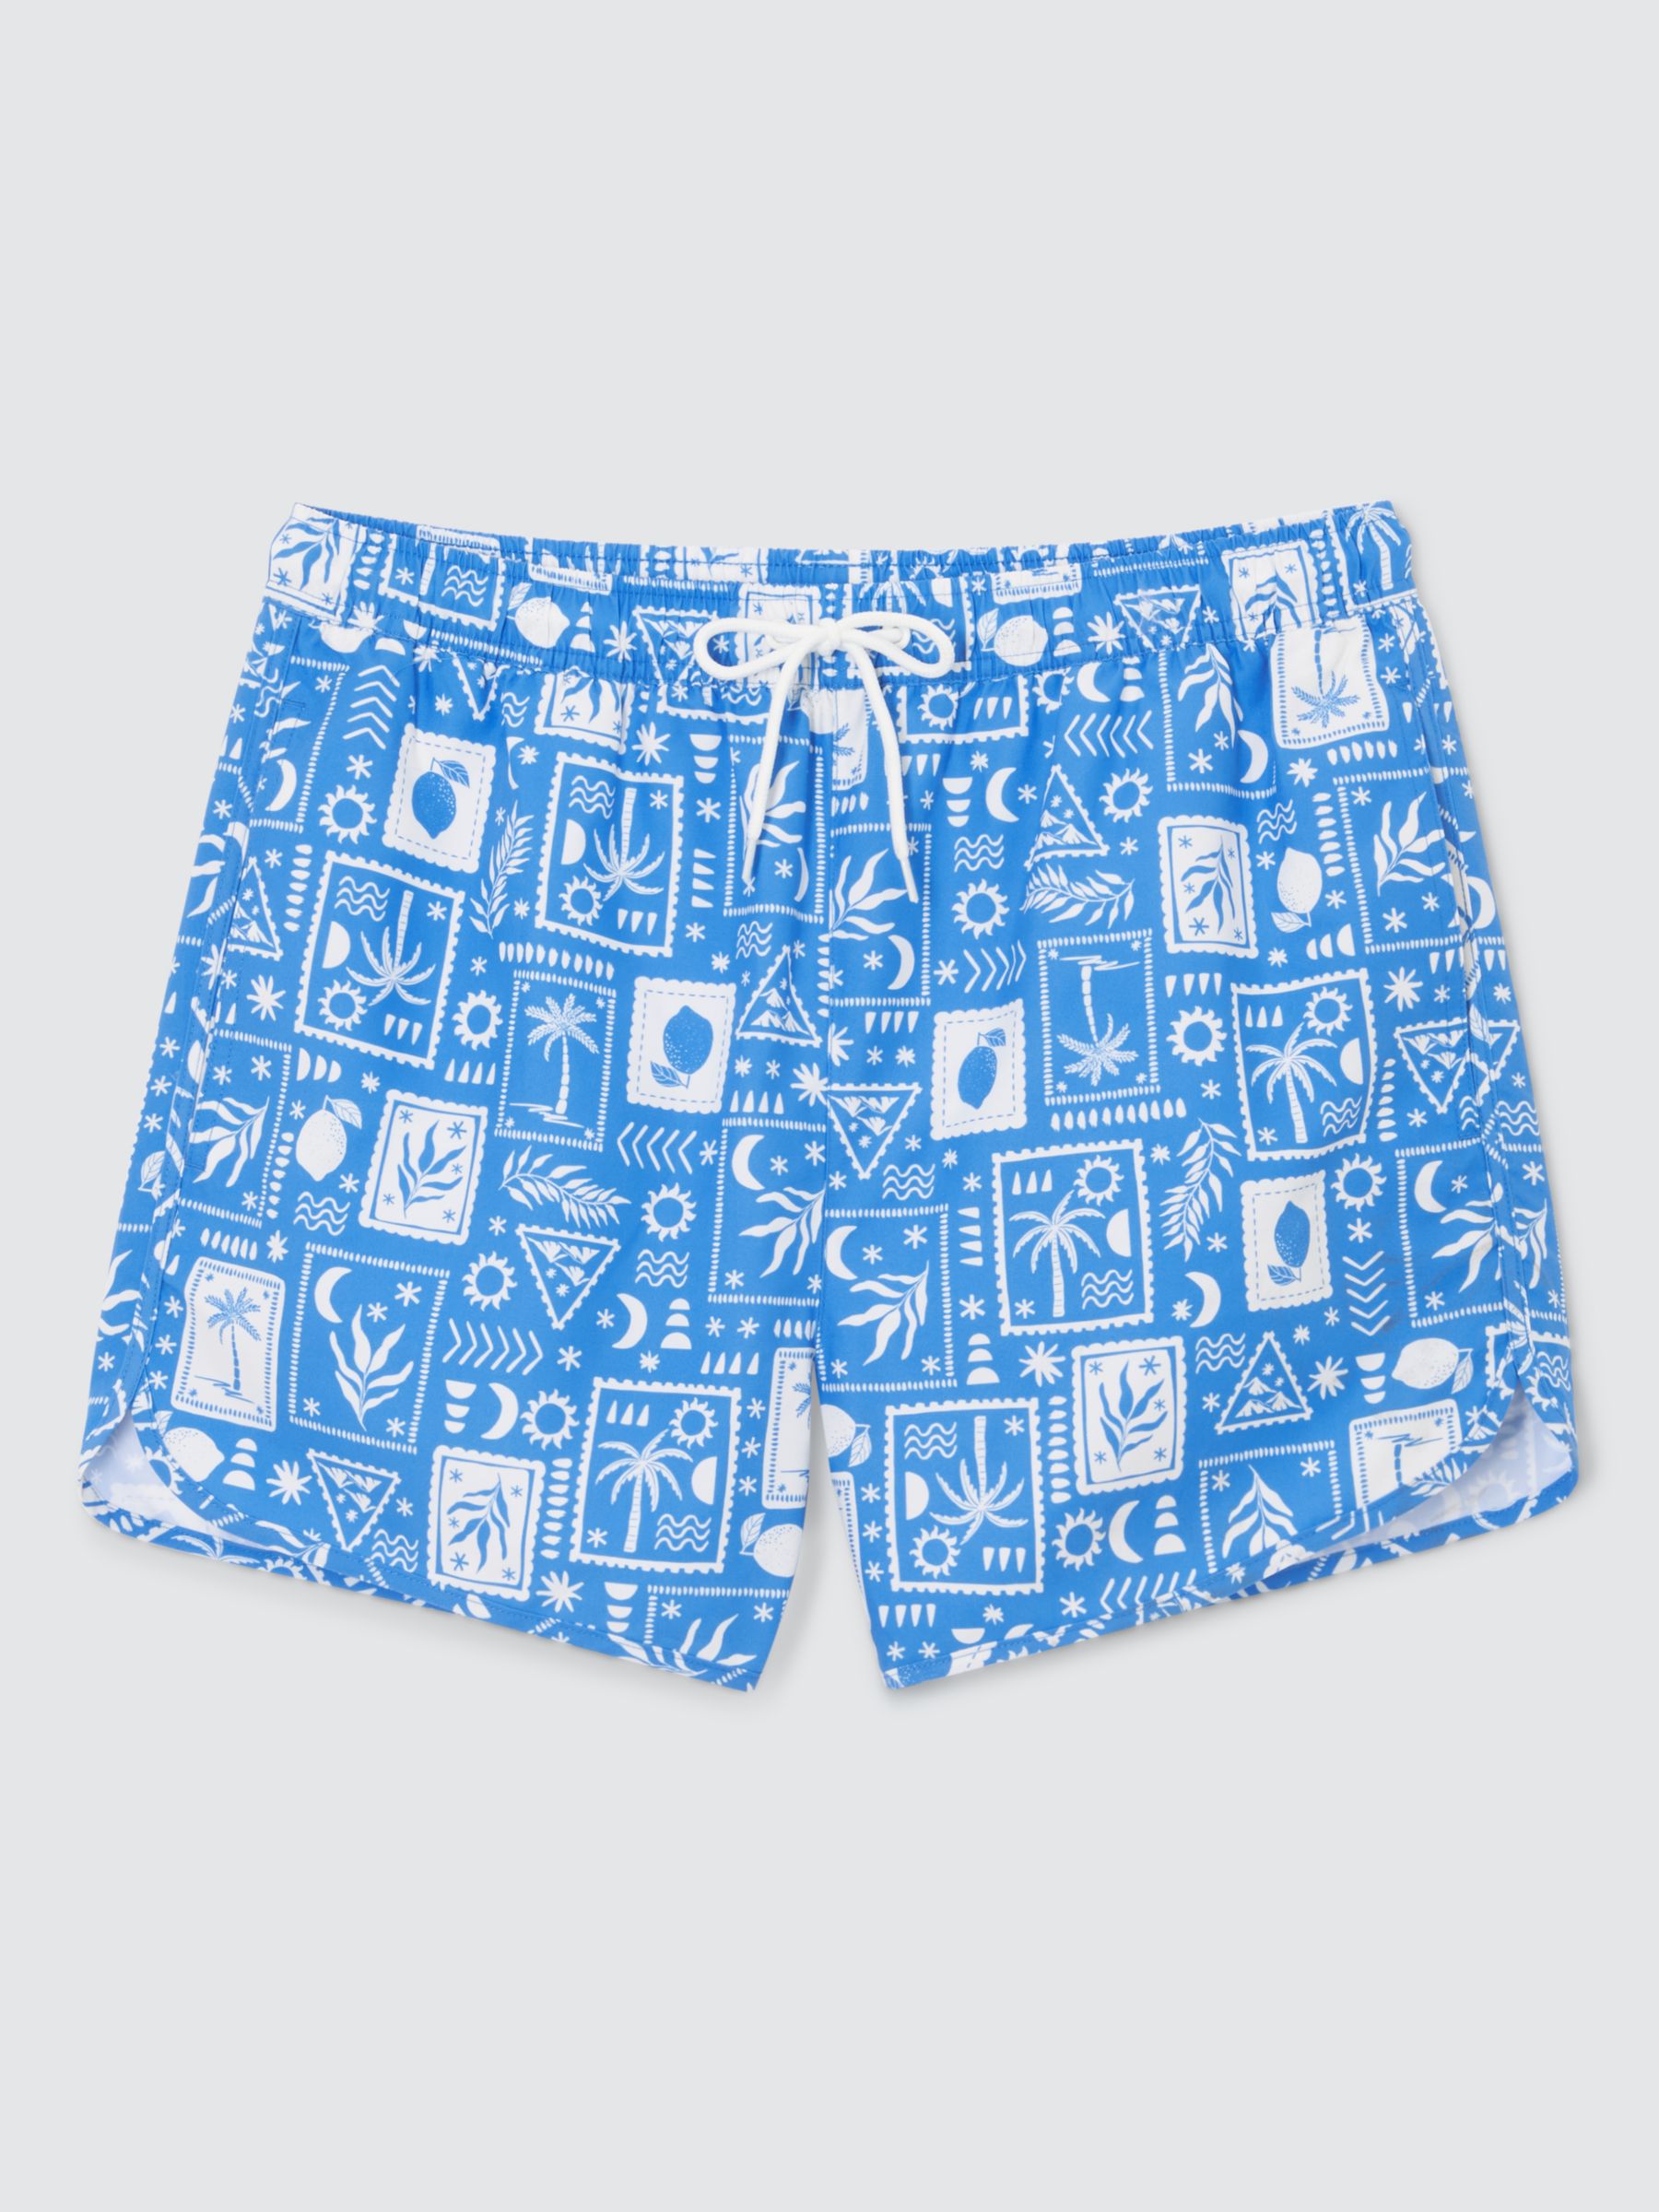 John Lewis ANYDAY Abstract Swim Shorts, Blue/Multi, S